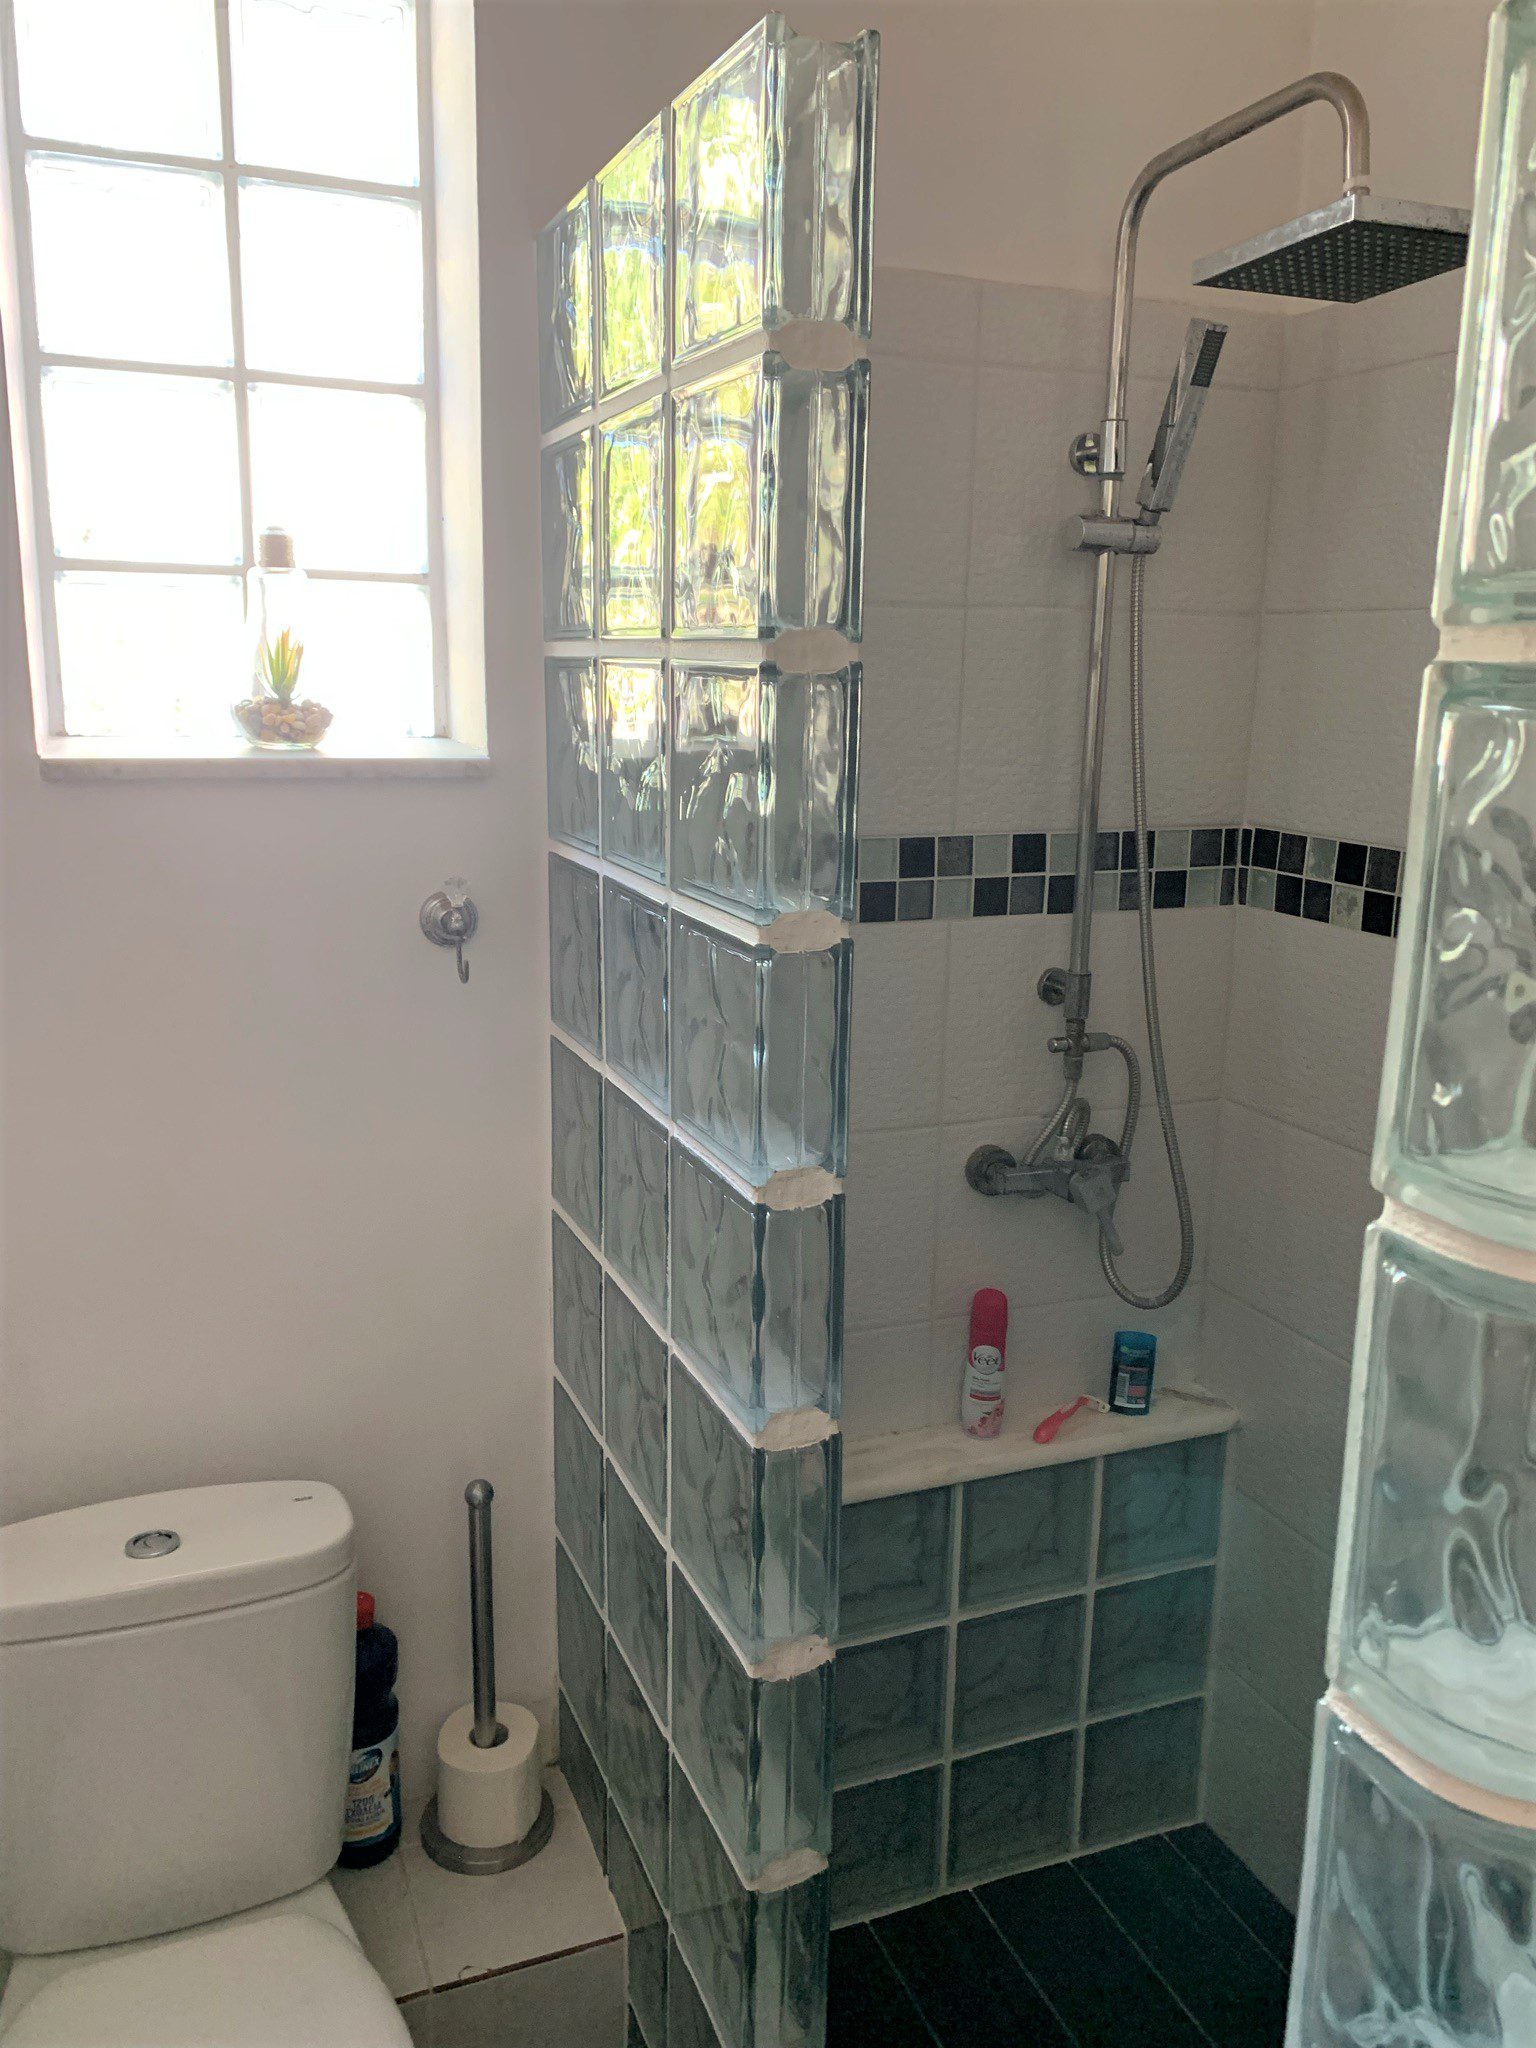 Bathroom of house for sale in Ithaca Greece, Lefki